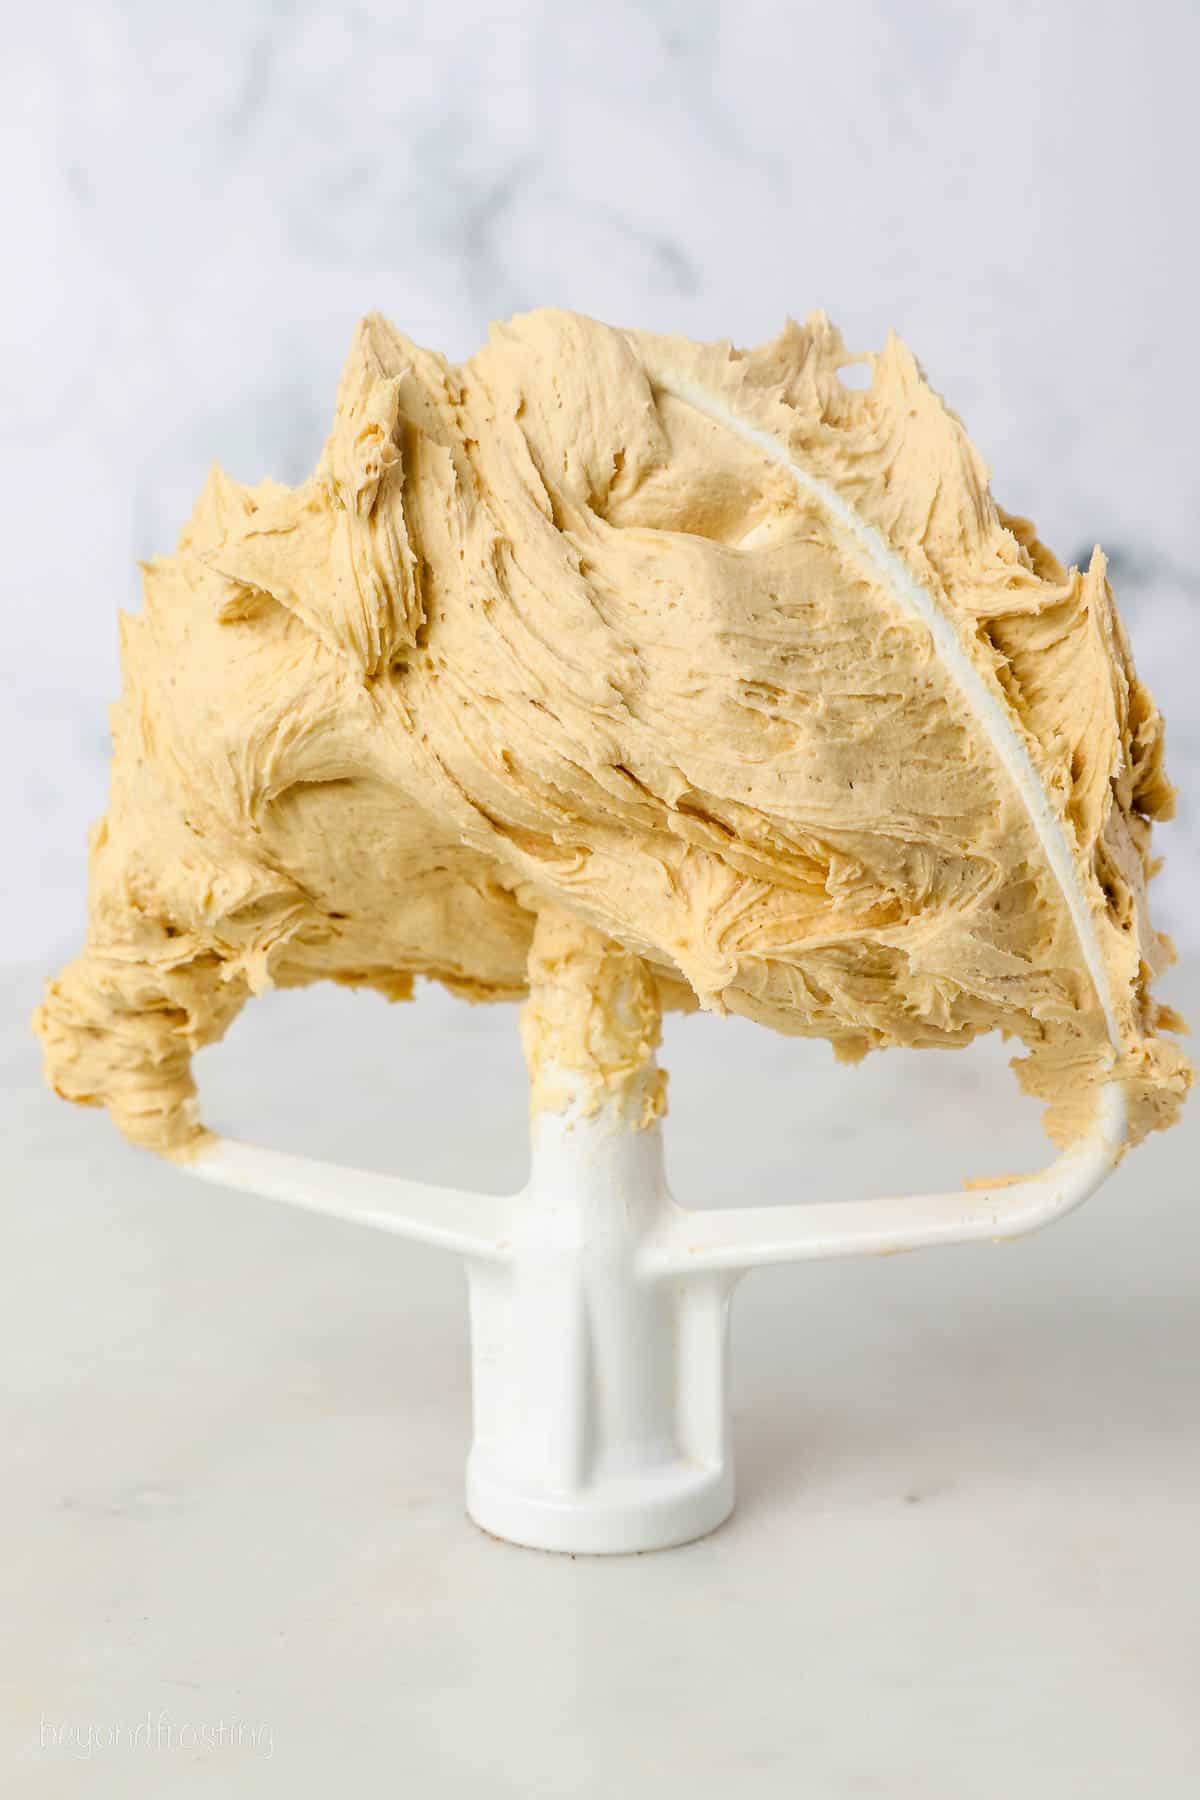 Coffee frosting on top of a stand mixer attachment propped up on a countertop.